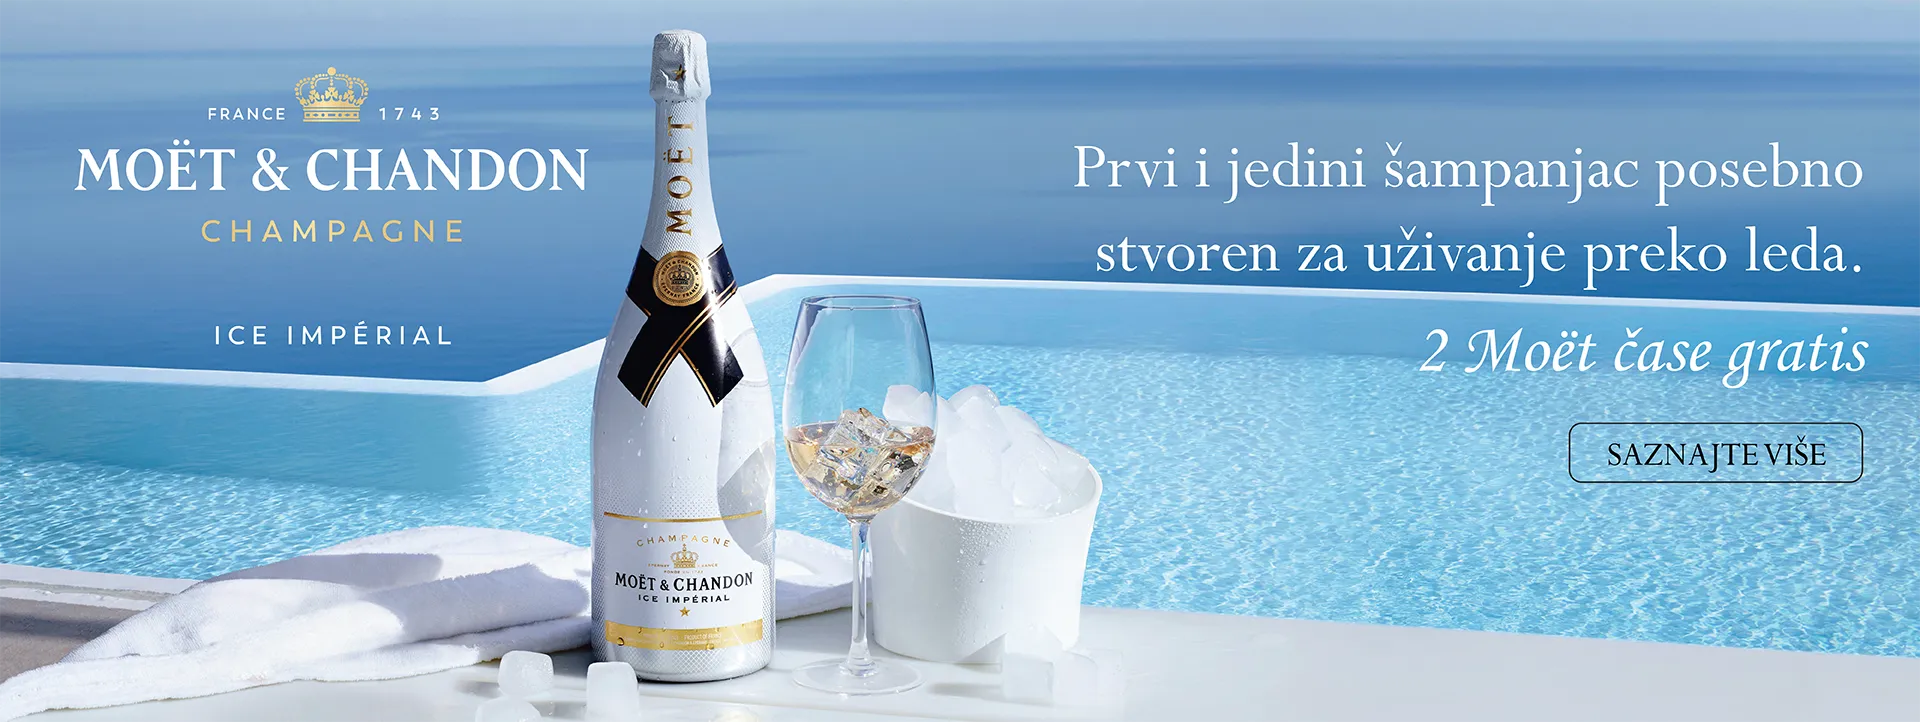 Moet & Chandon - Ice imperial